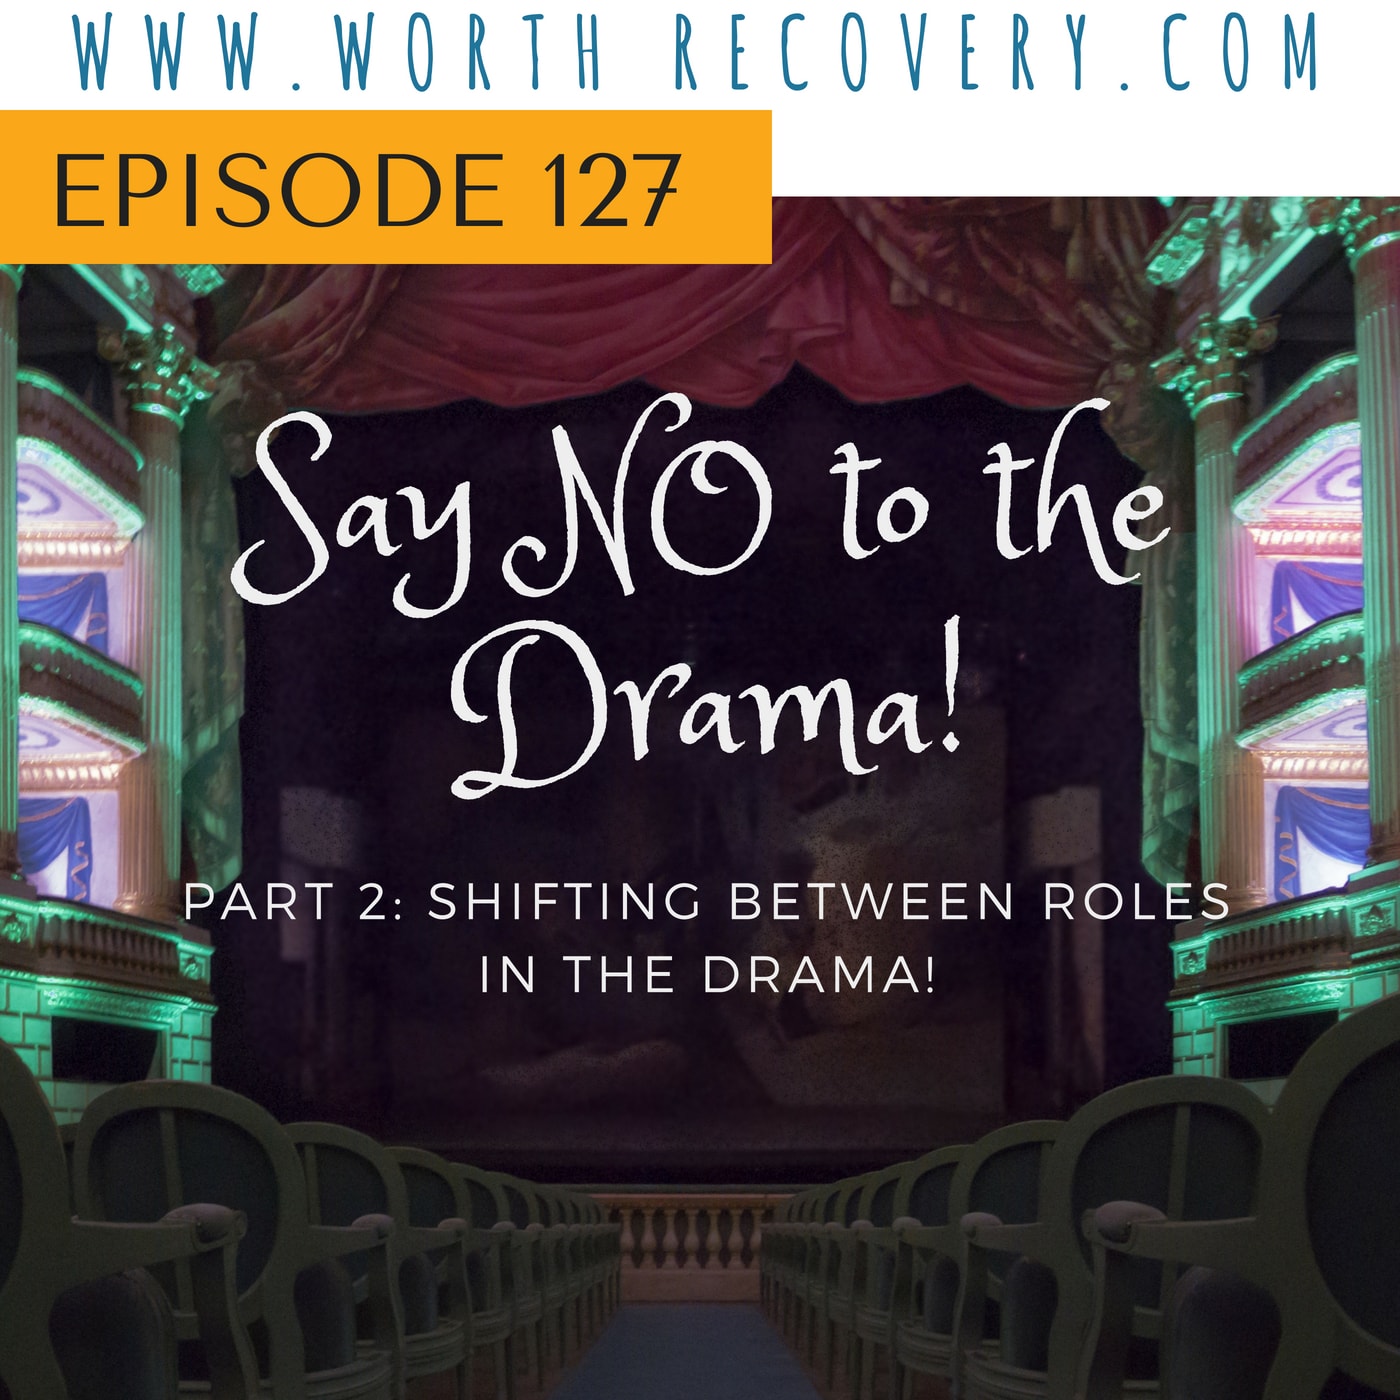 Episode 127: Say No To the Drama, Part 2